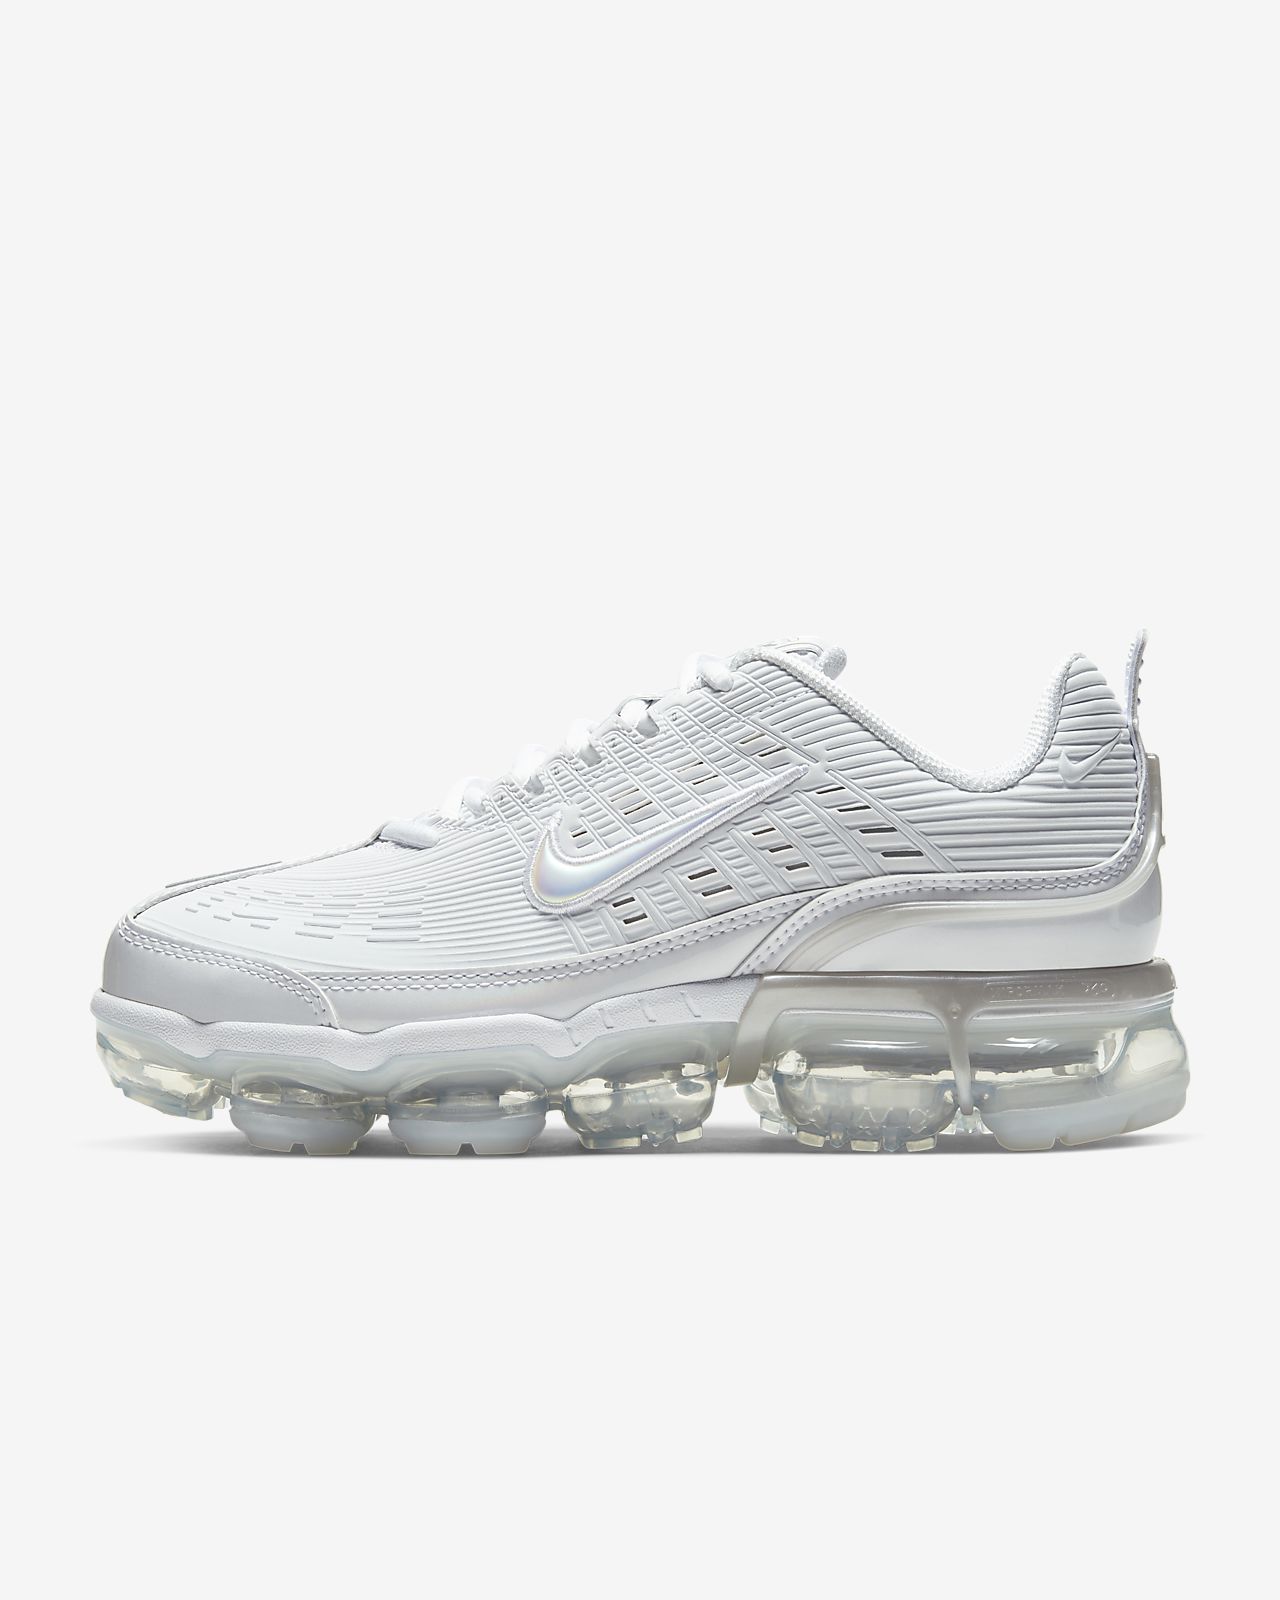 nike air vapormax 360 buy clothes shoes online